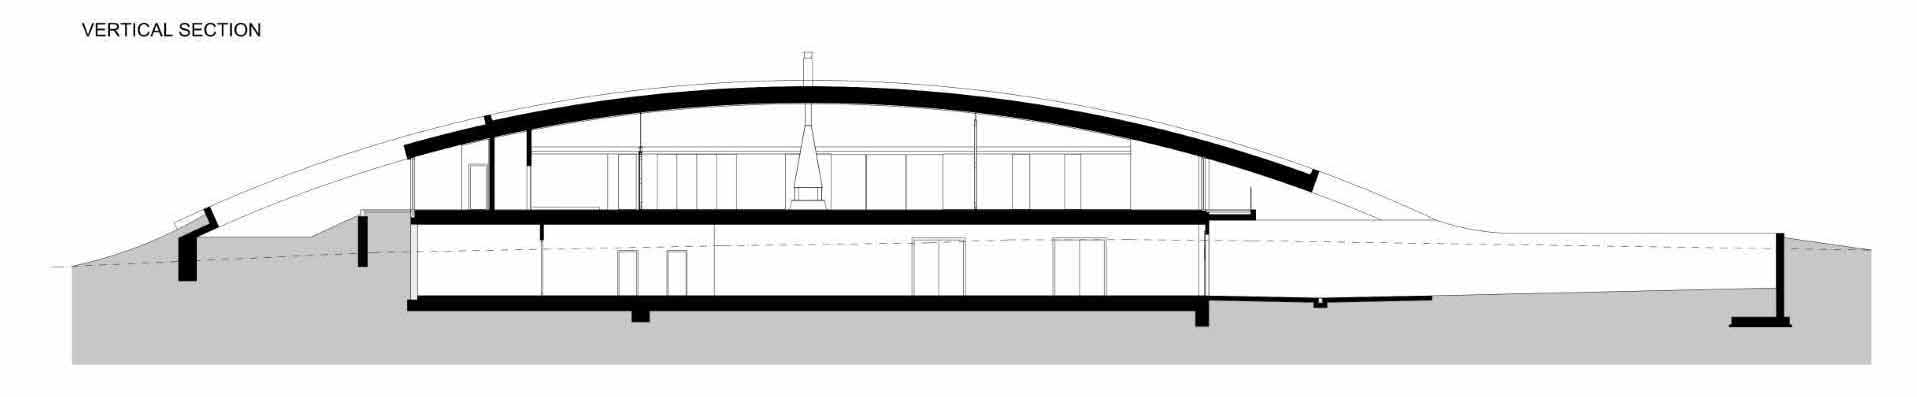 The architectural drawings of a modern winery with a curved roof.